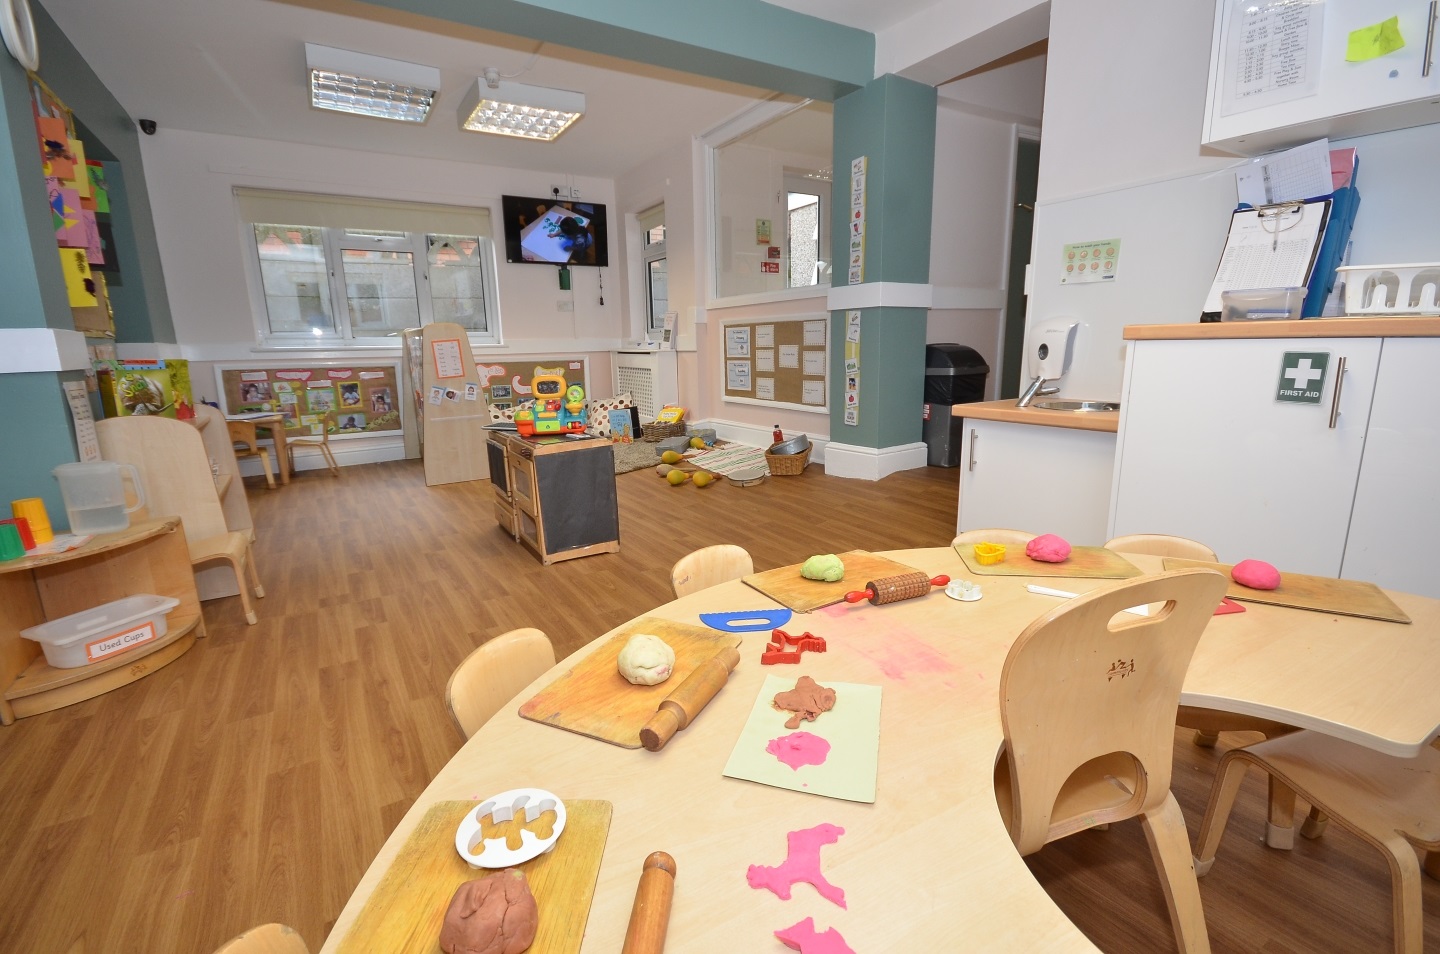 Asquith Golders Green Day Nursery and Preschool